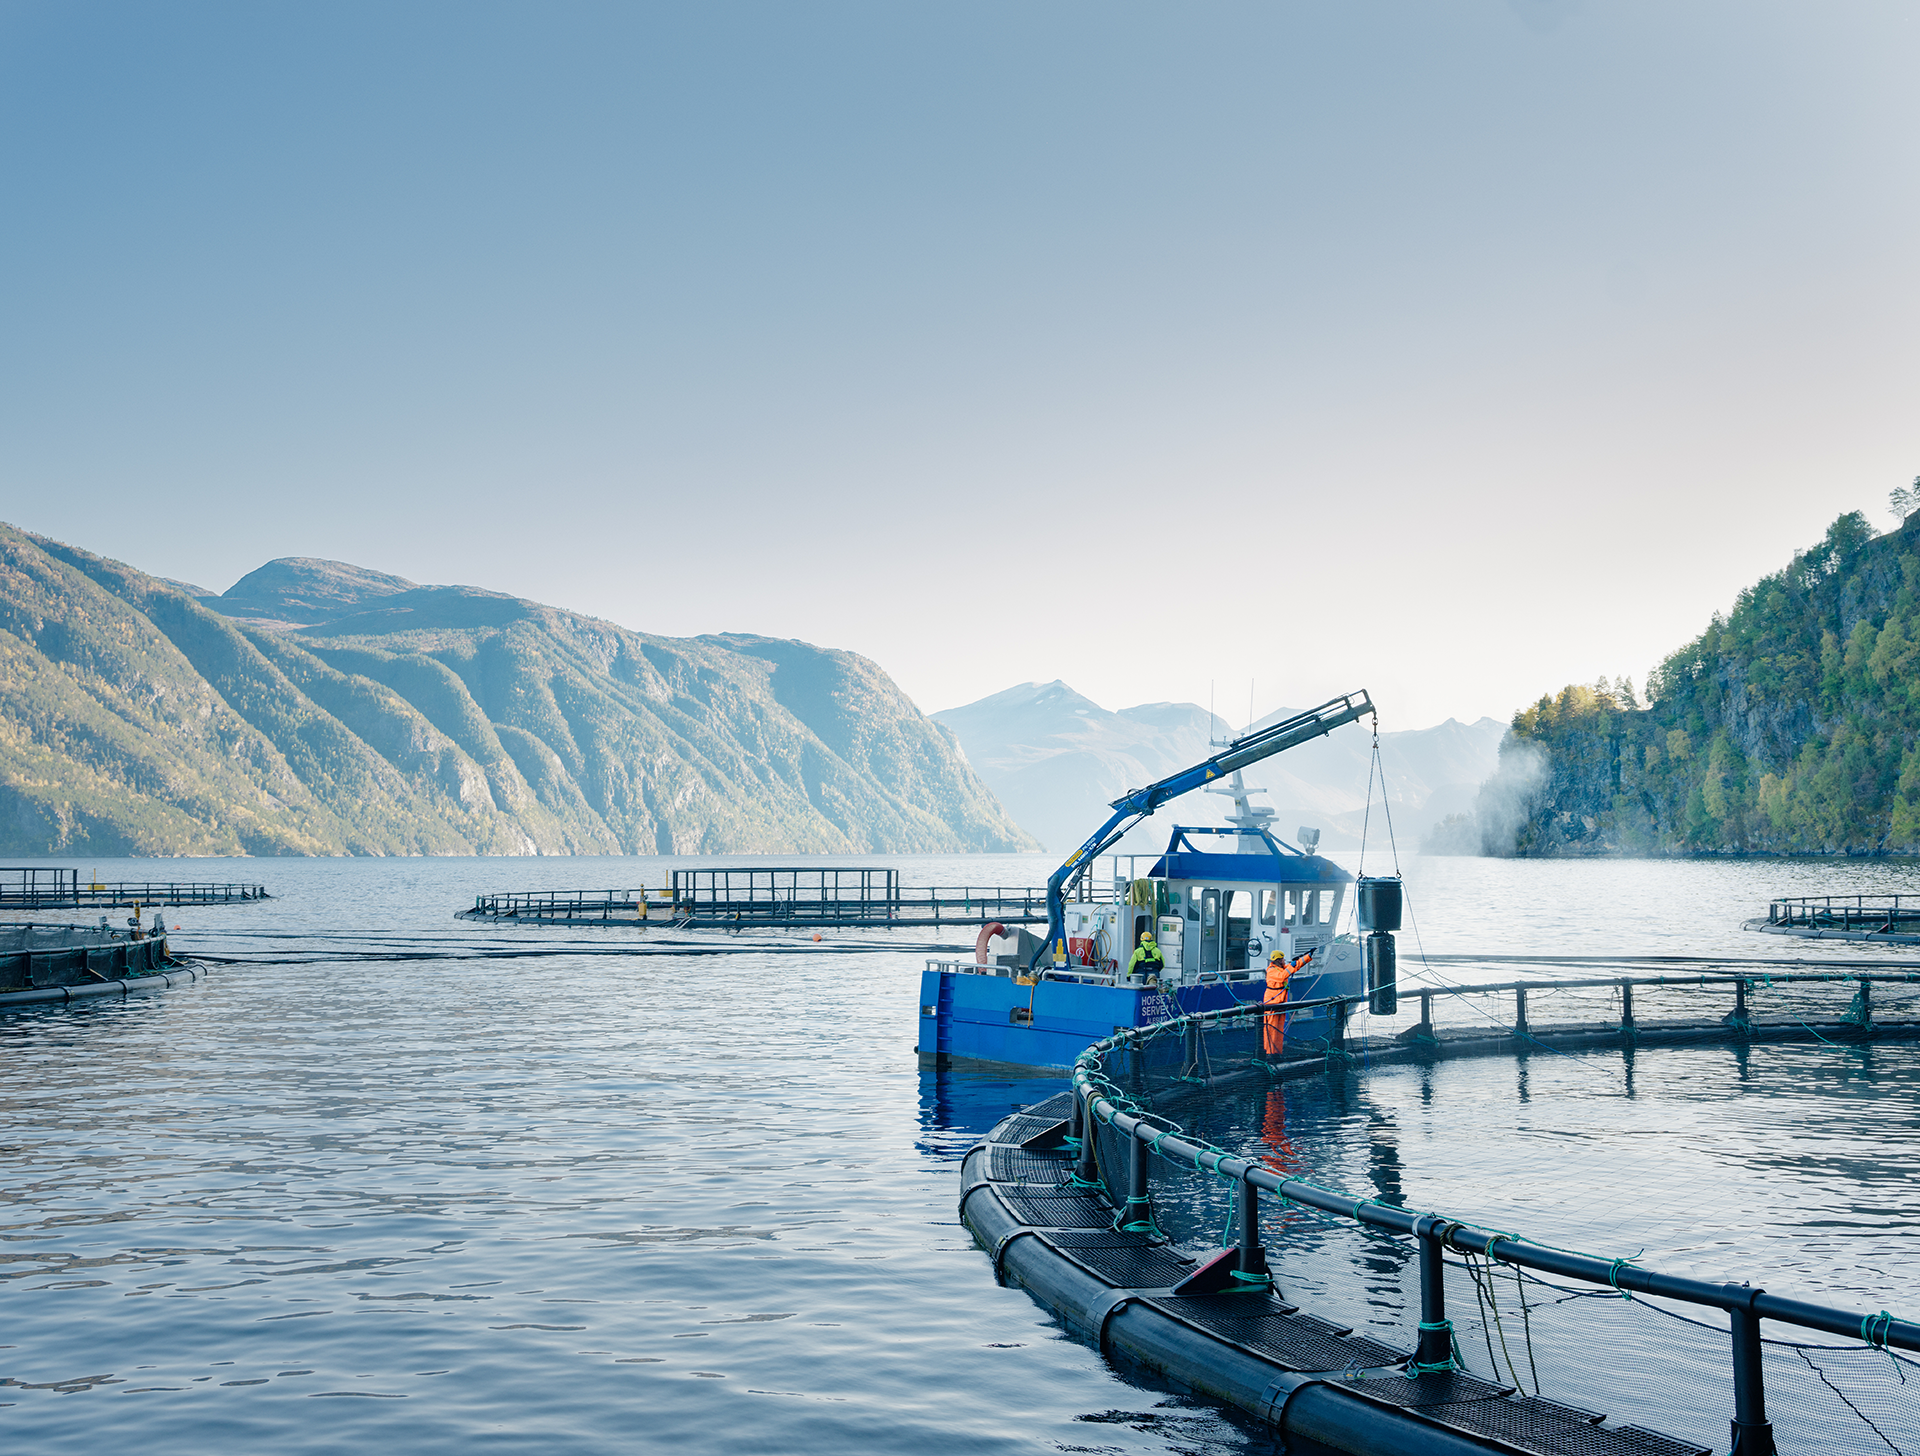 Fish farm with boat in fjord